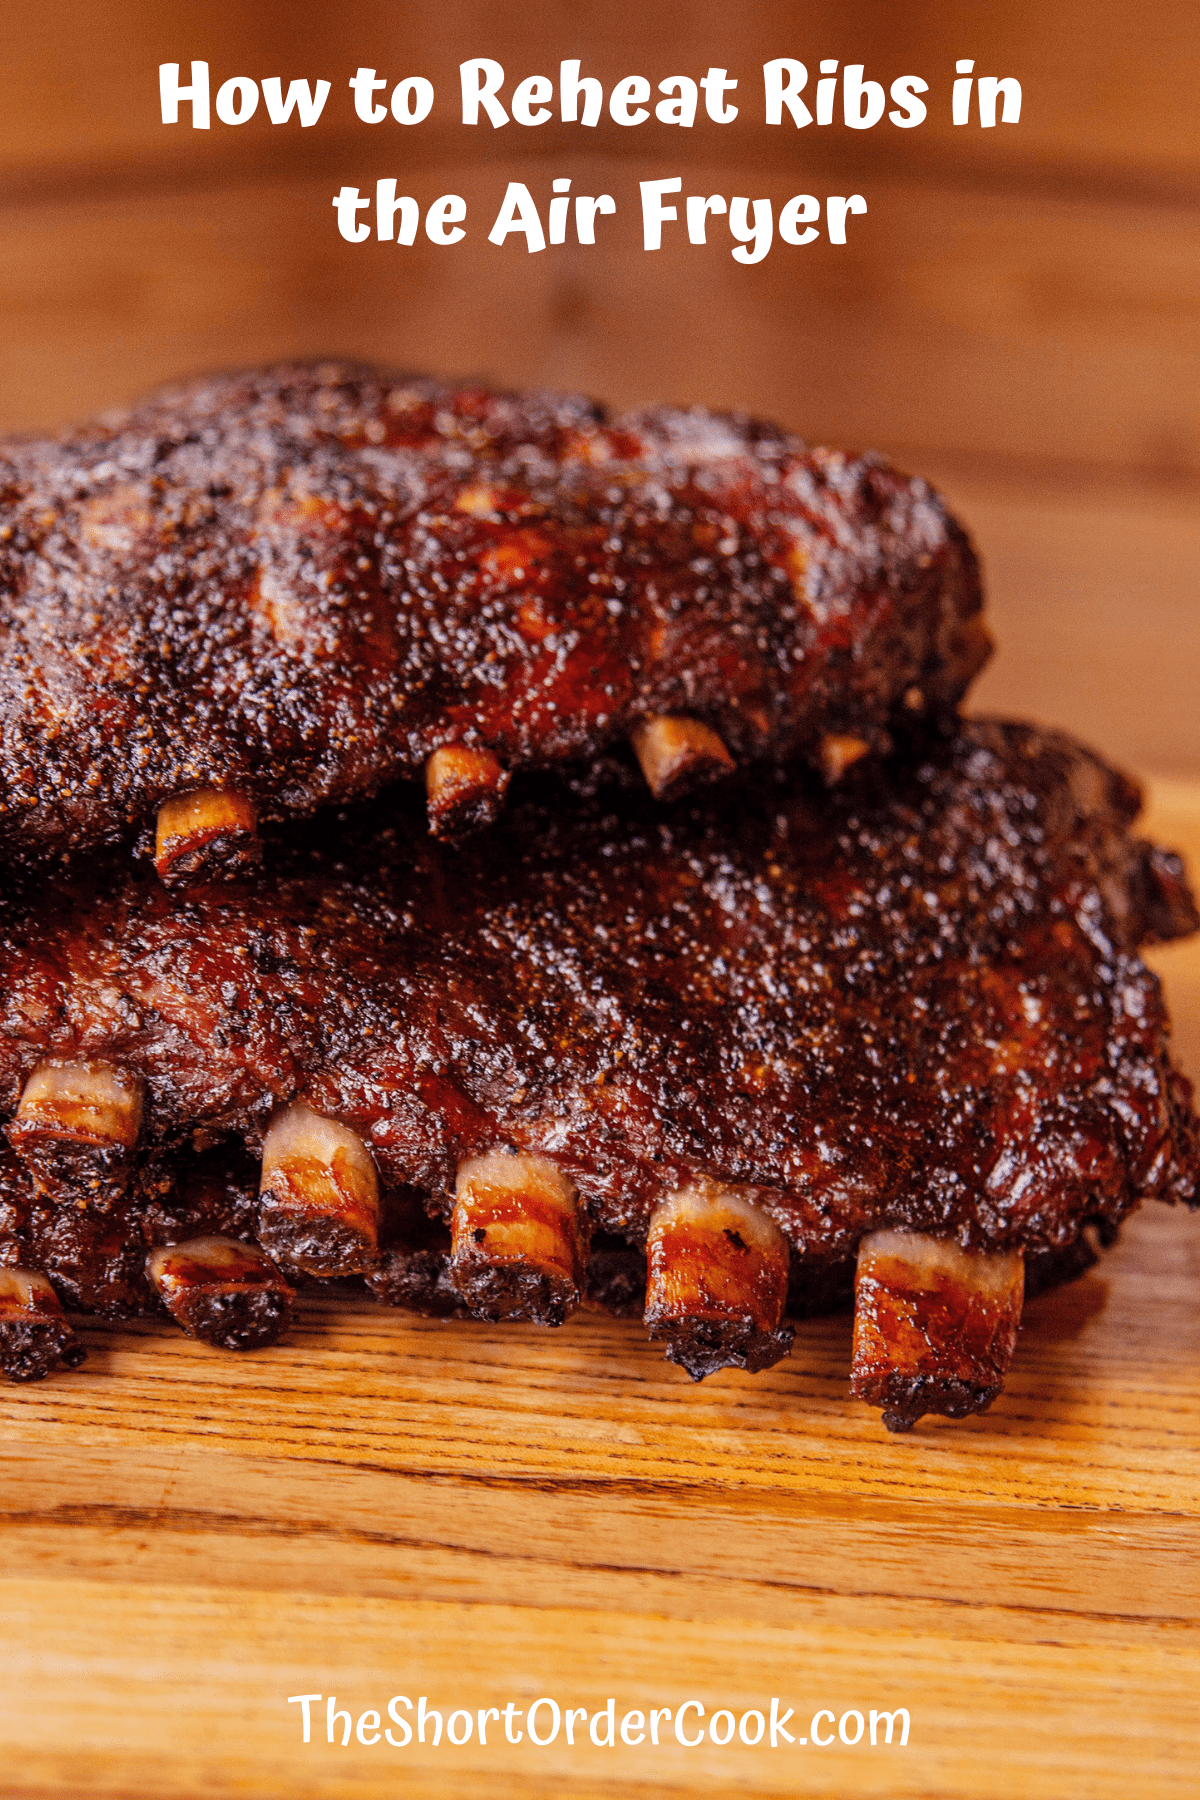 A cutting board with two racks of cooked ribs on it.